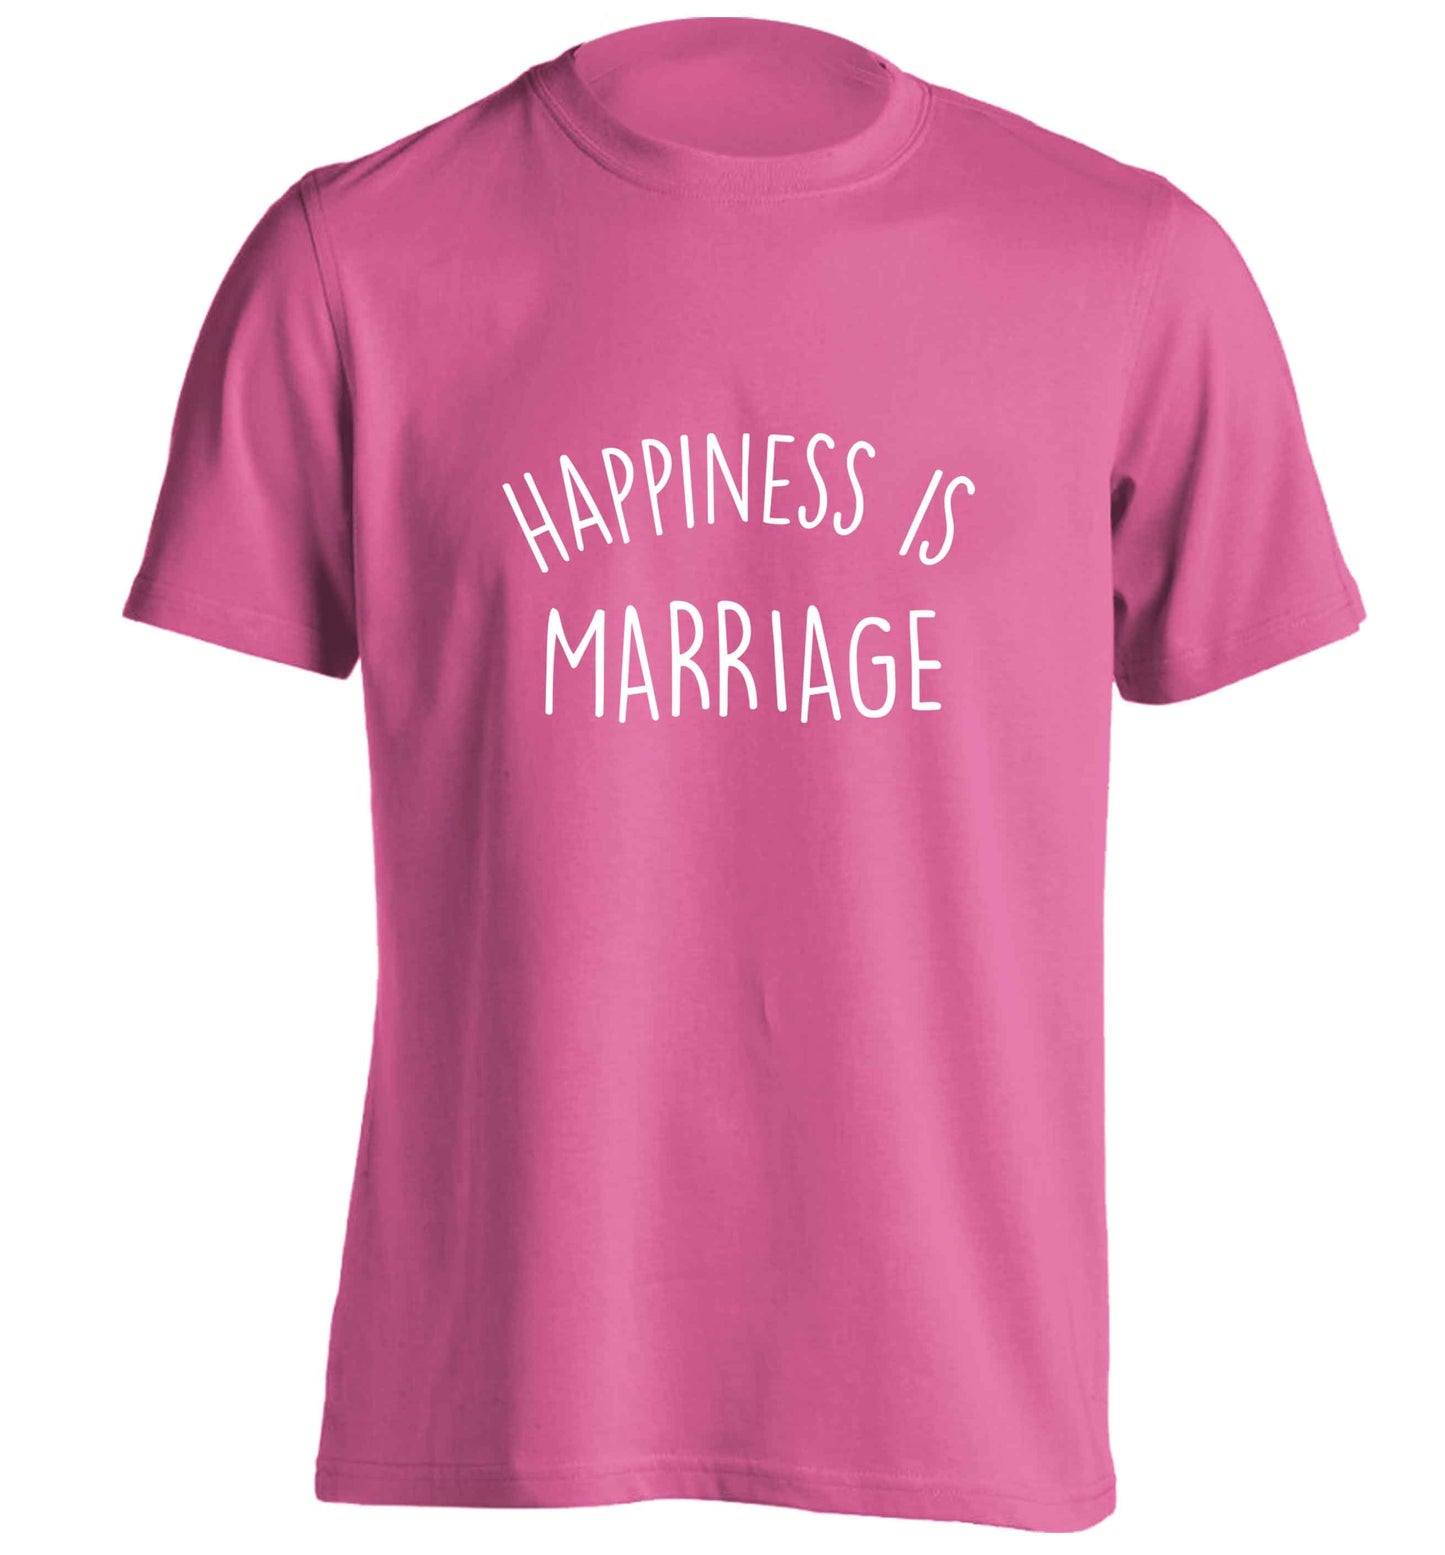 Happiness is marriage adults unisex pink Tshirt 2XL